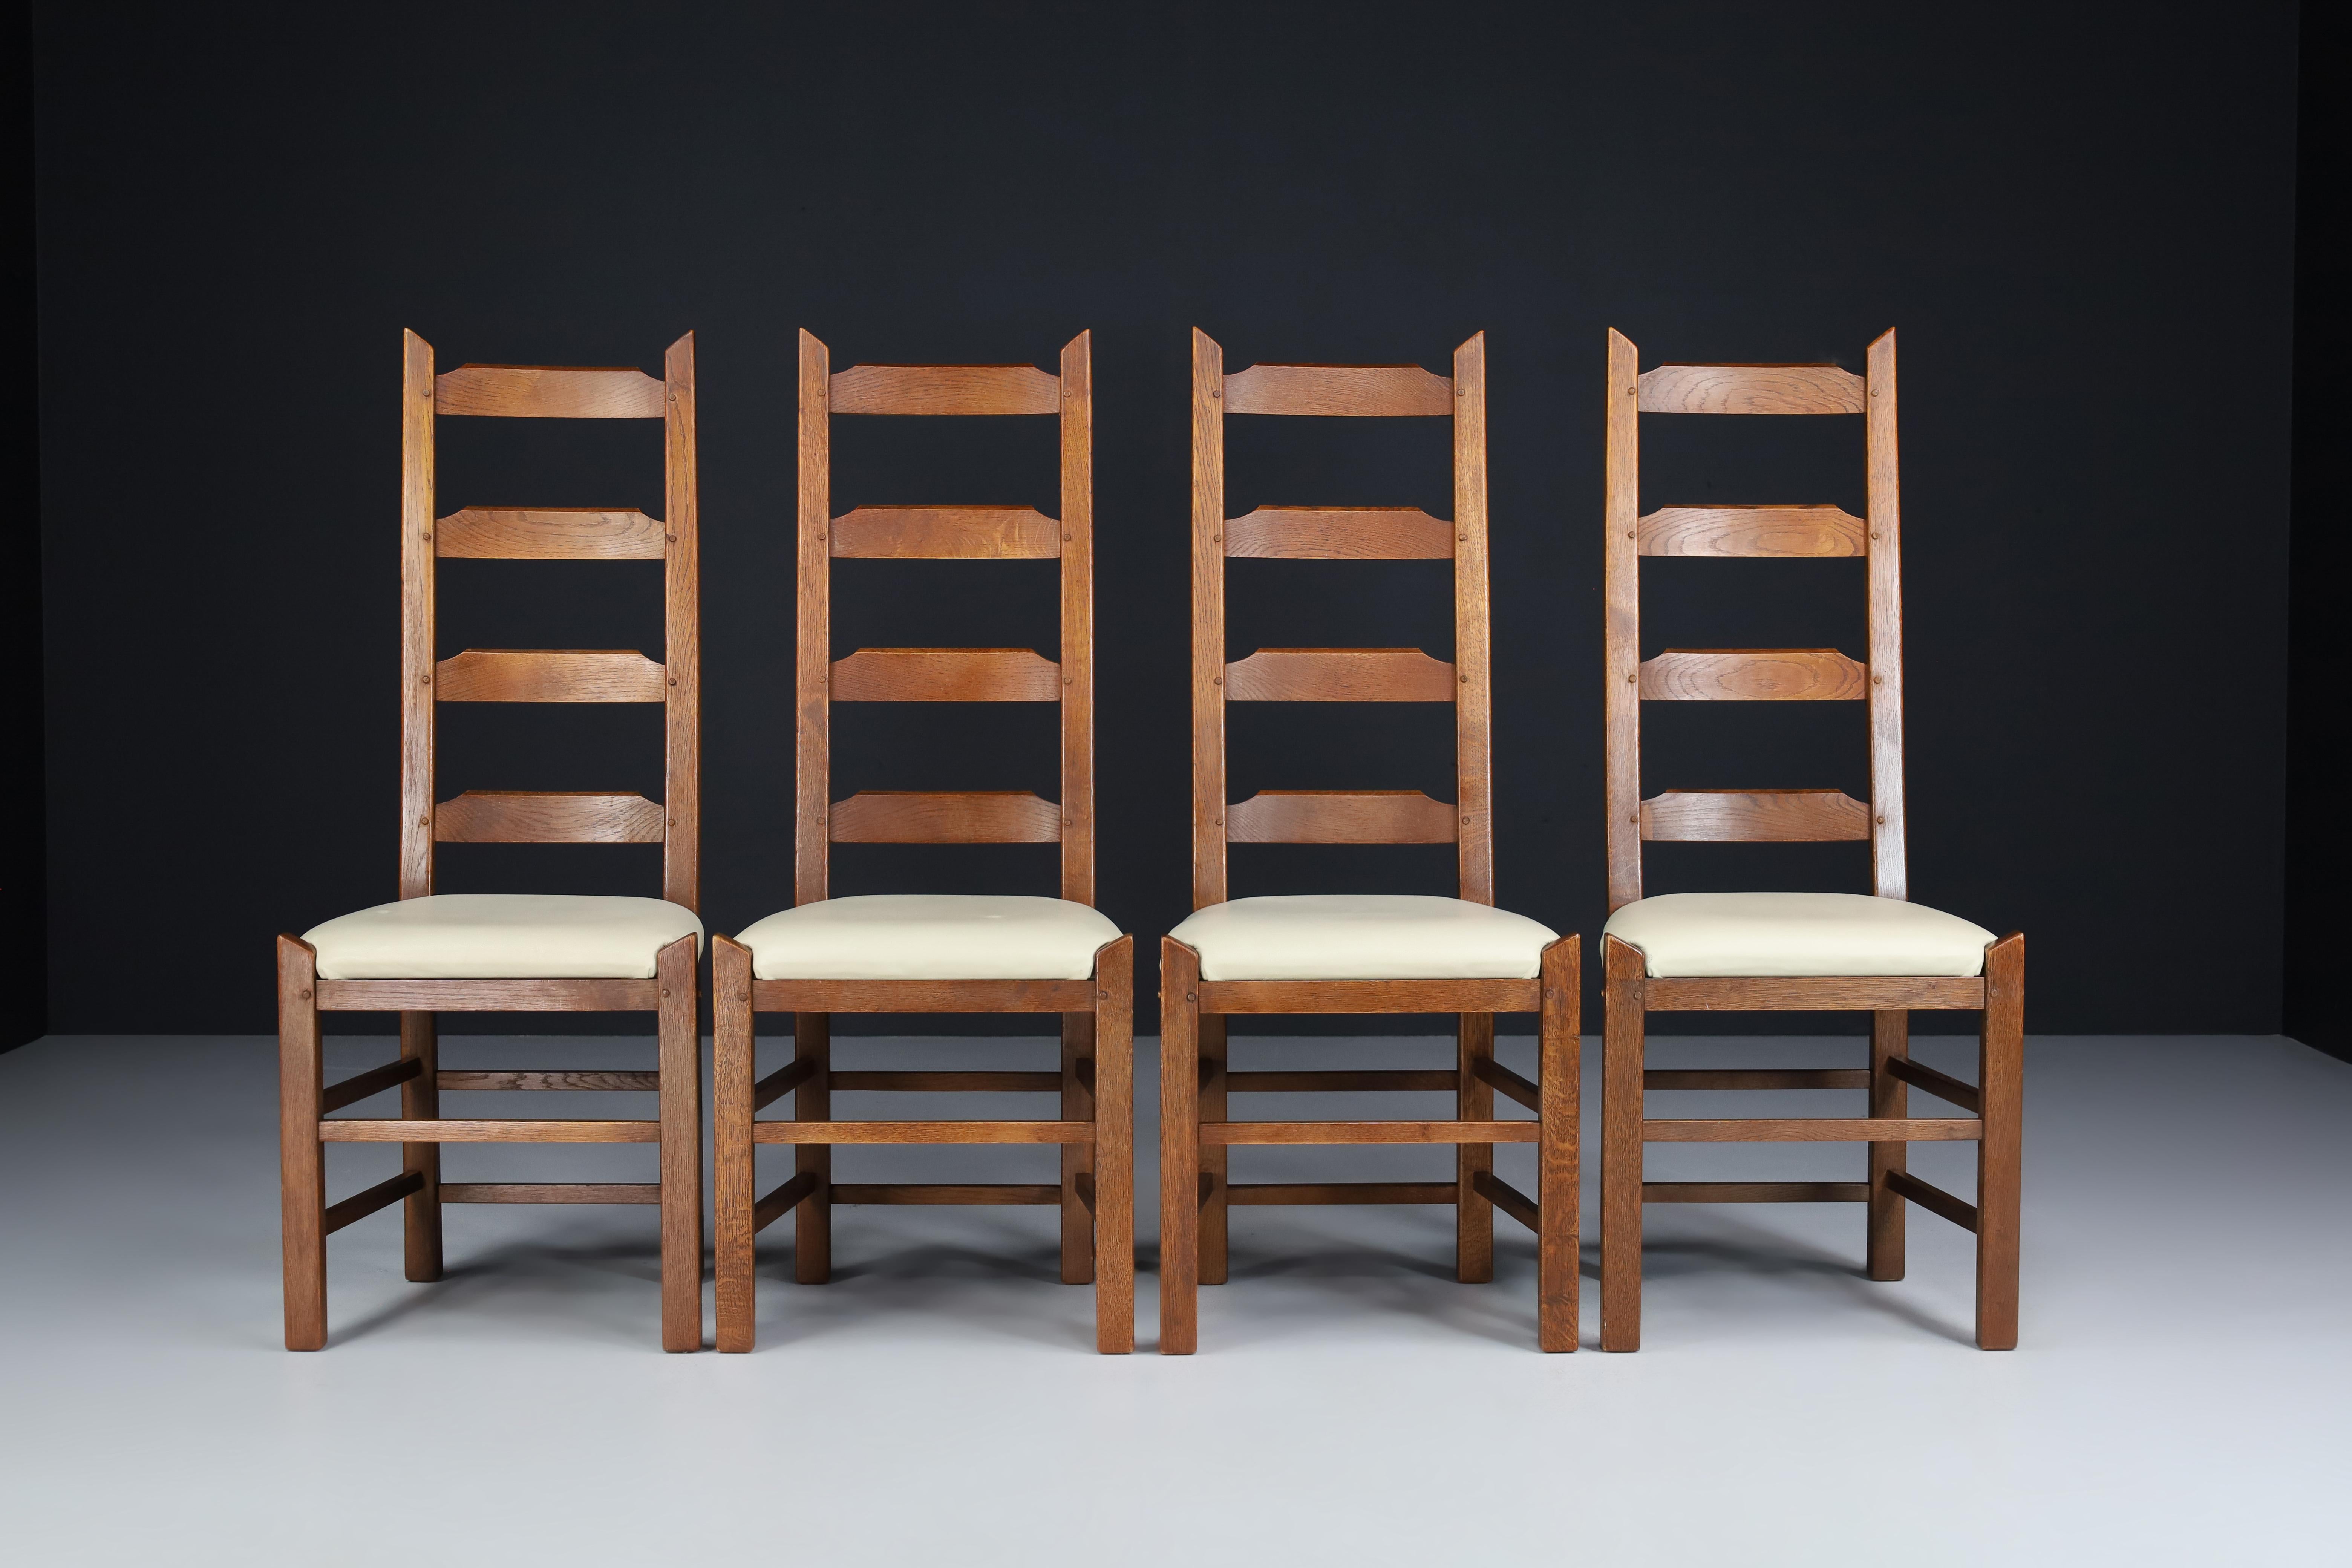 Ladder Back Chairs Crafted in Oak and Leather Seats, France, 1950s For Sale 2